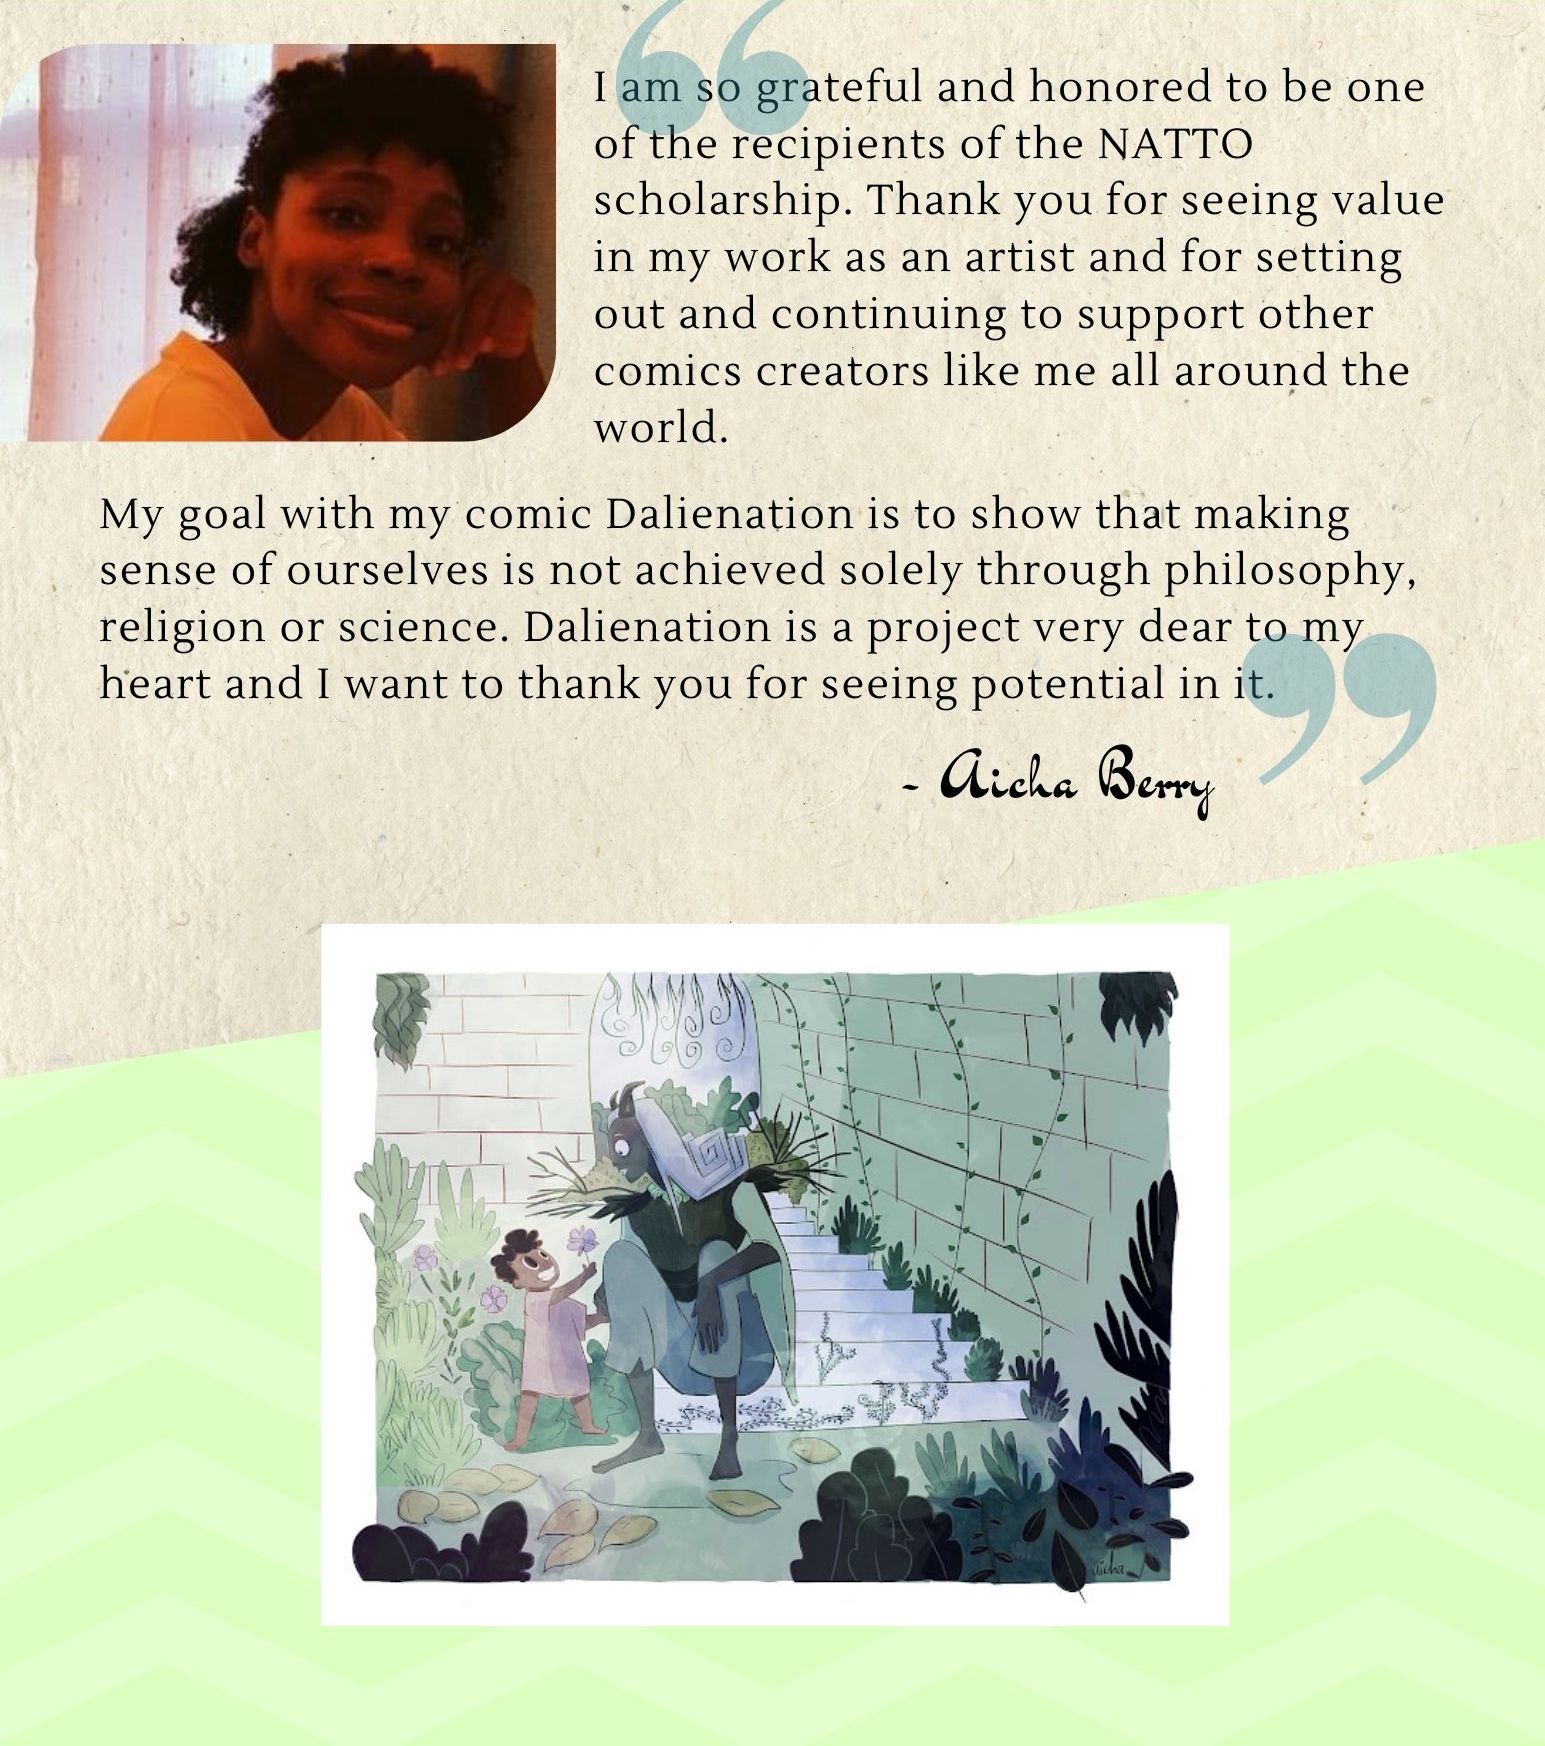 I am so grateful and honored to be one of the recipients of the NATTO scholarship. Thank you for seeing value in my work as an artist and for setting out and continuing to support other comics creators like me all around the world. My goal with my comic Dalienation is to show that making sense of ourselves is not achieved solely through philosophy, religion or science. Dalienation is a project very dear to my heart and I want to thank you for seeing potential in it. -Aicha Berry